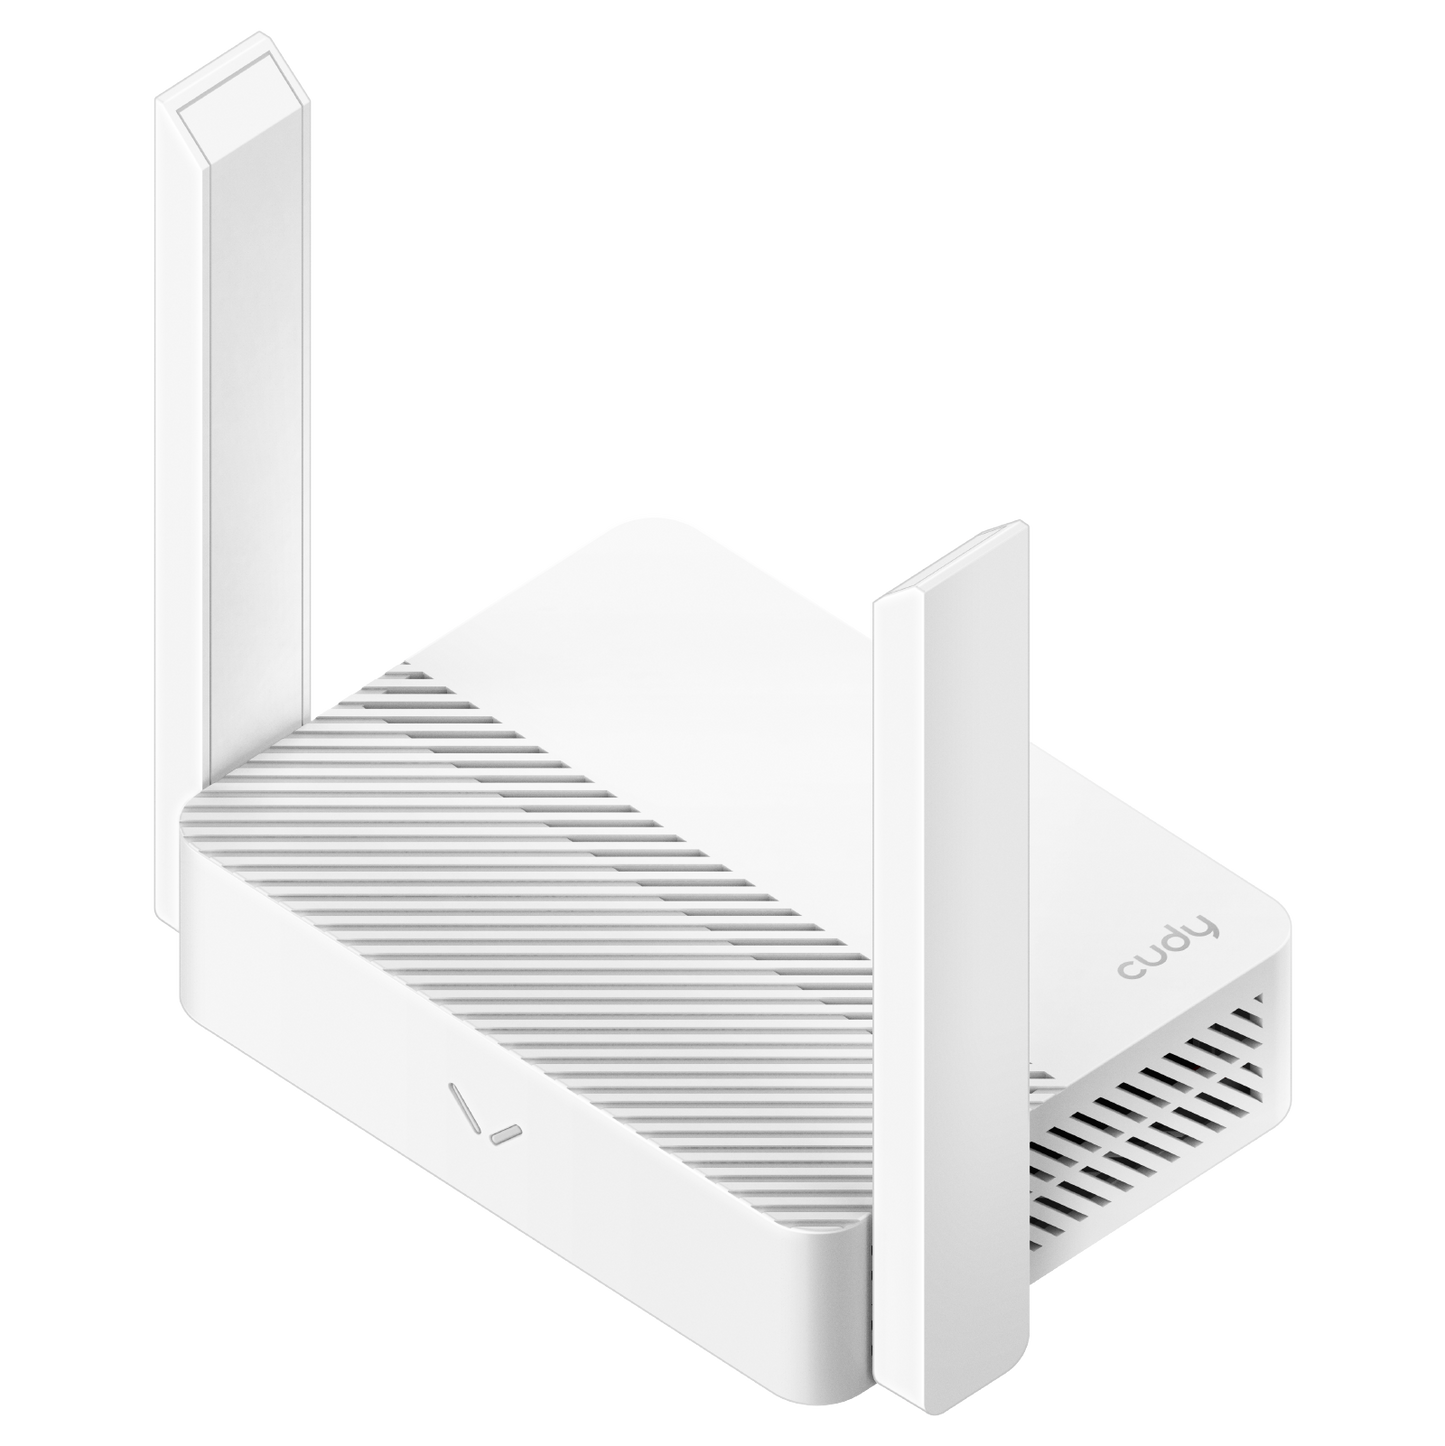 4G N300 Wi-Fi Router, LT300 2.0